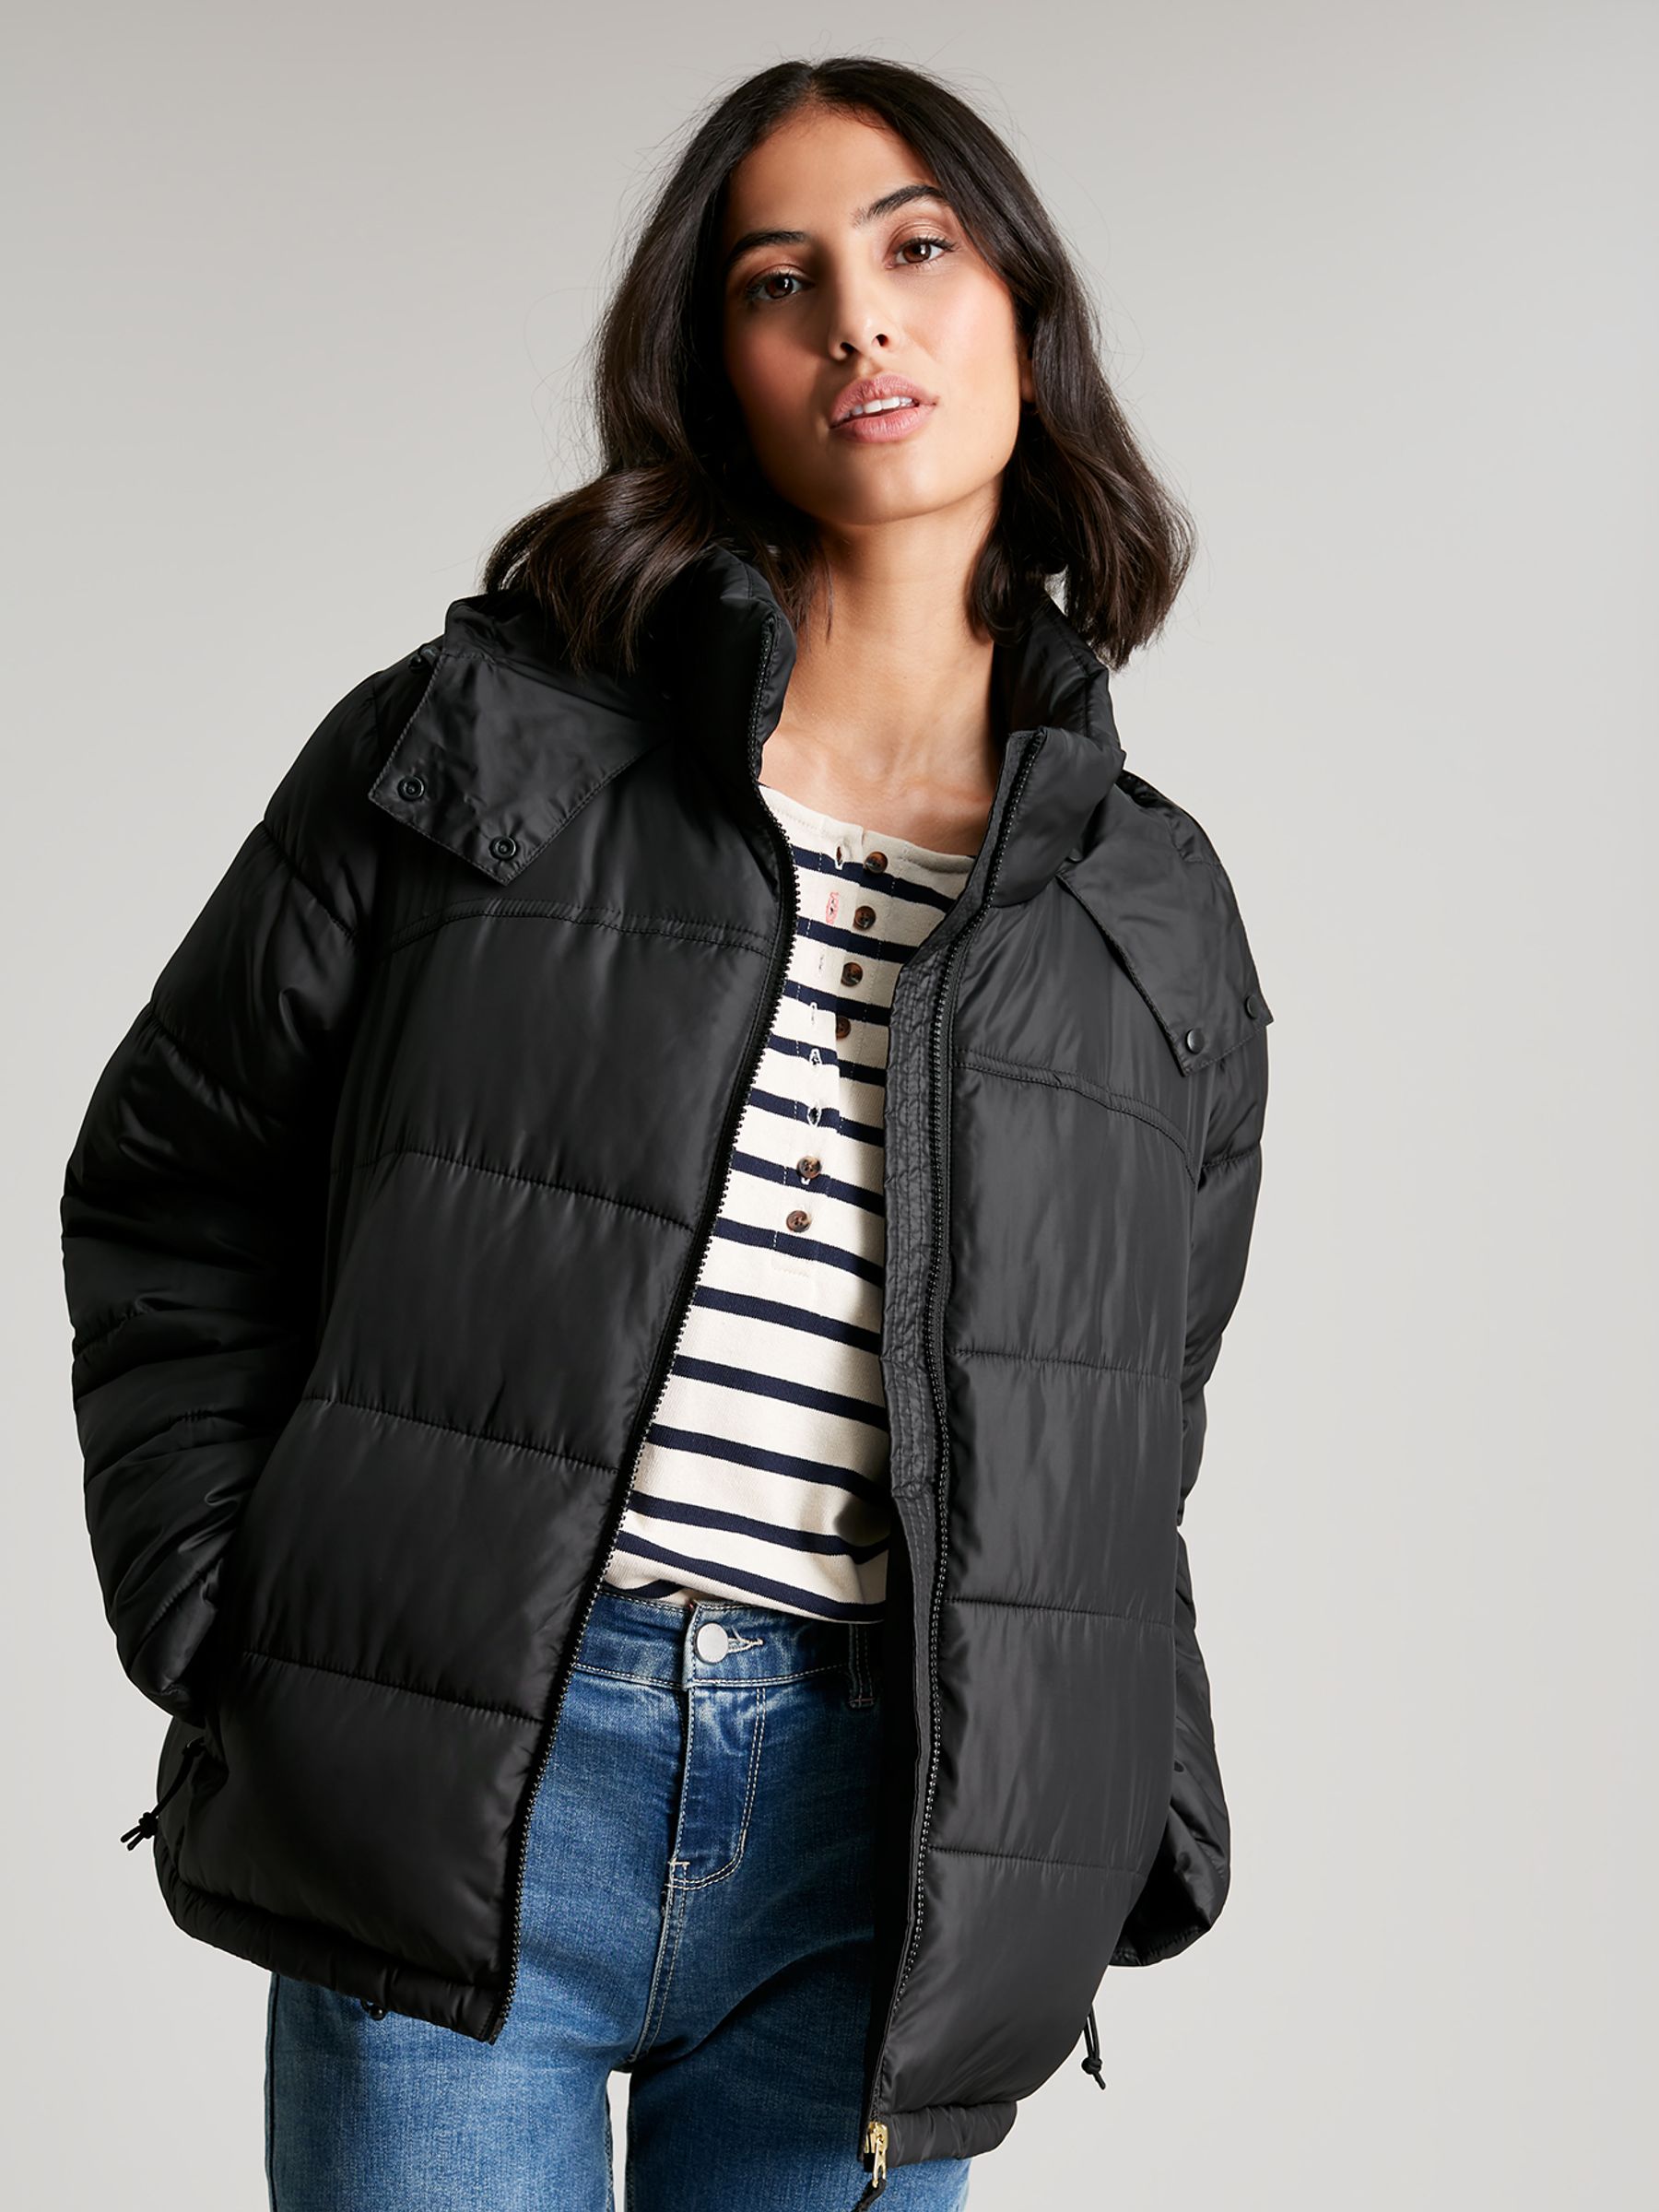 Buy Joules Elberry Super Puffer Black Jacket from the Joules online shop